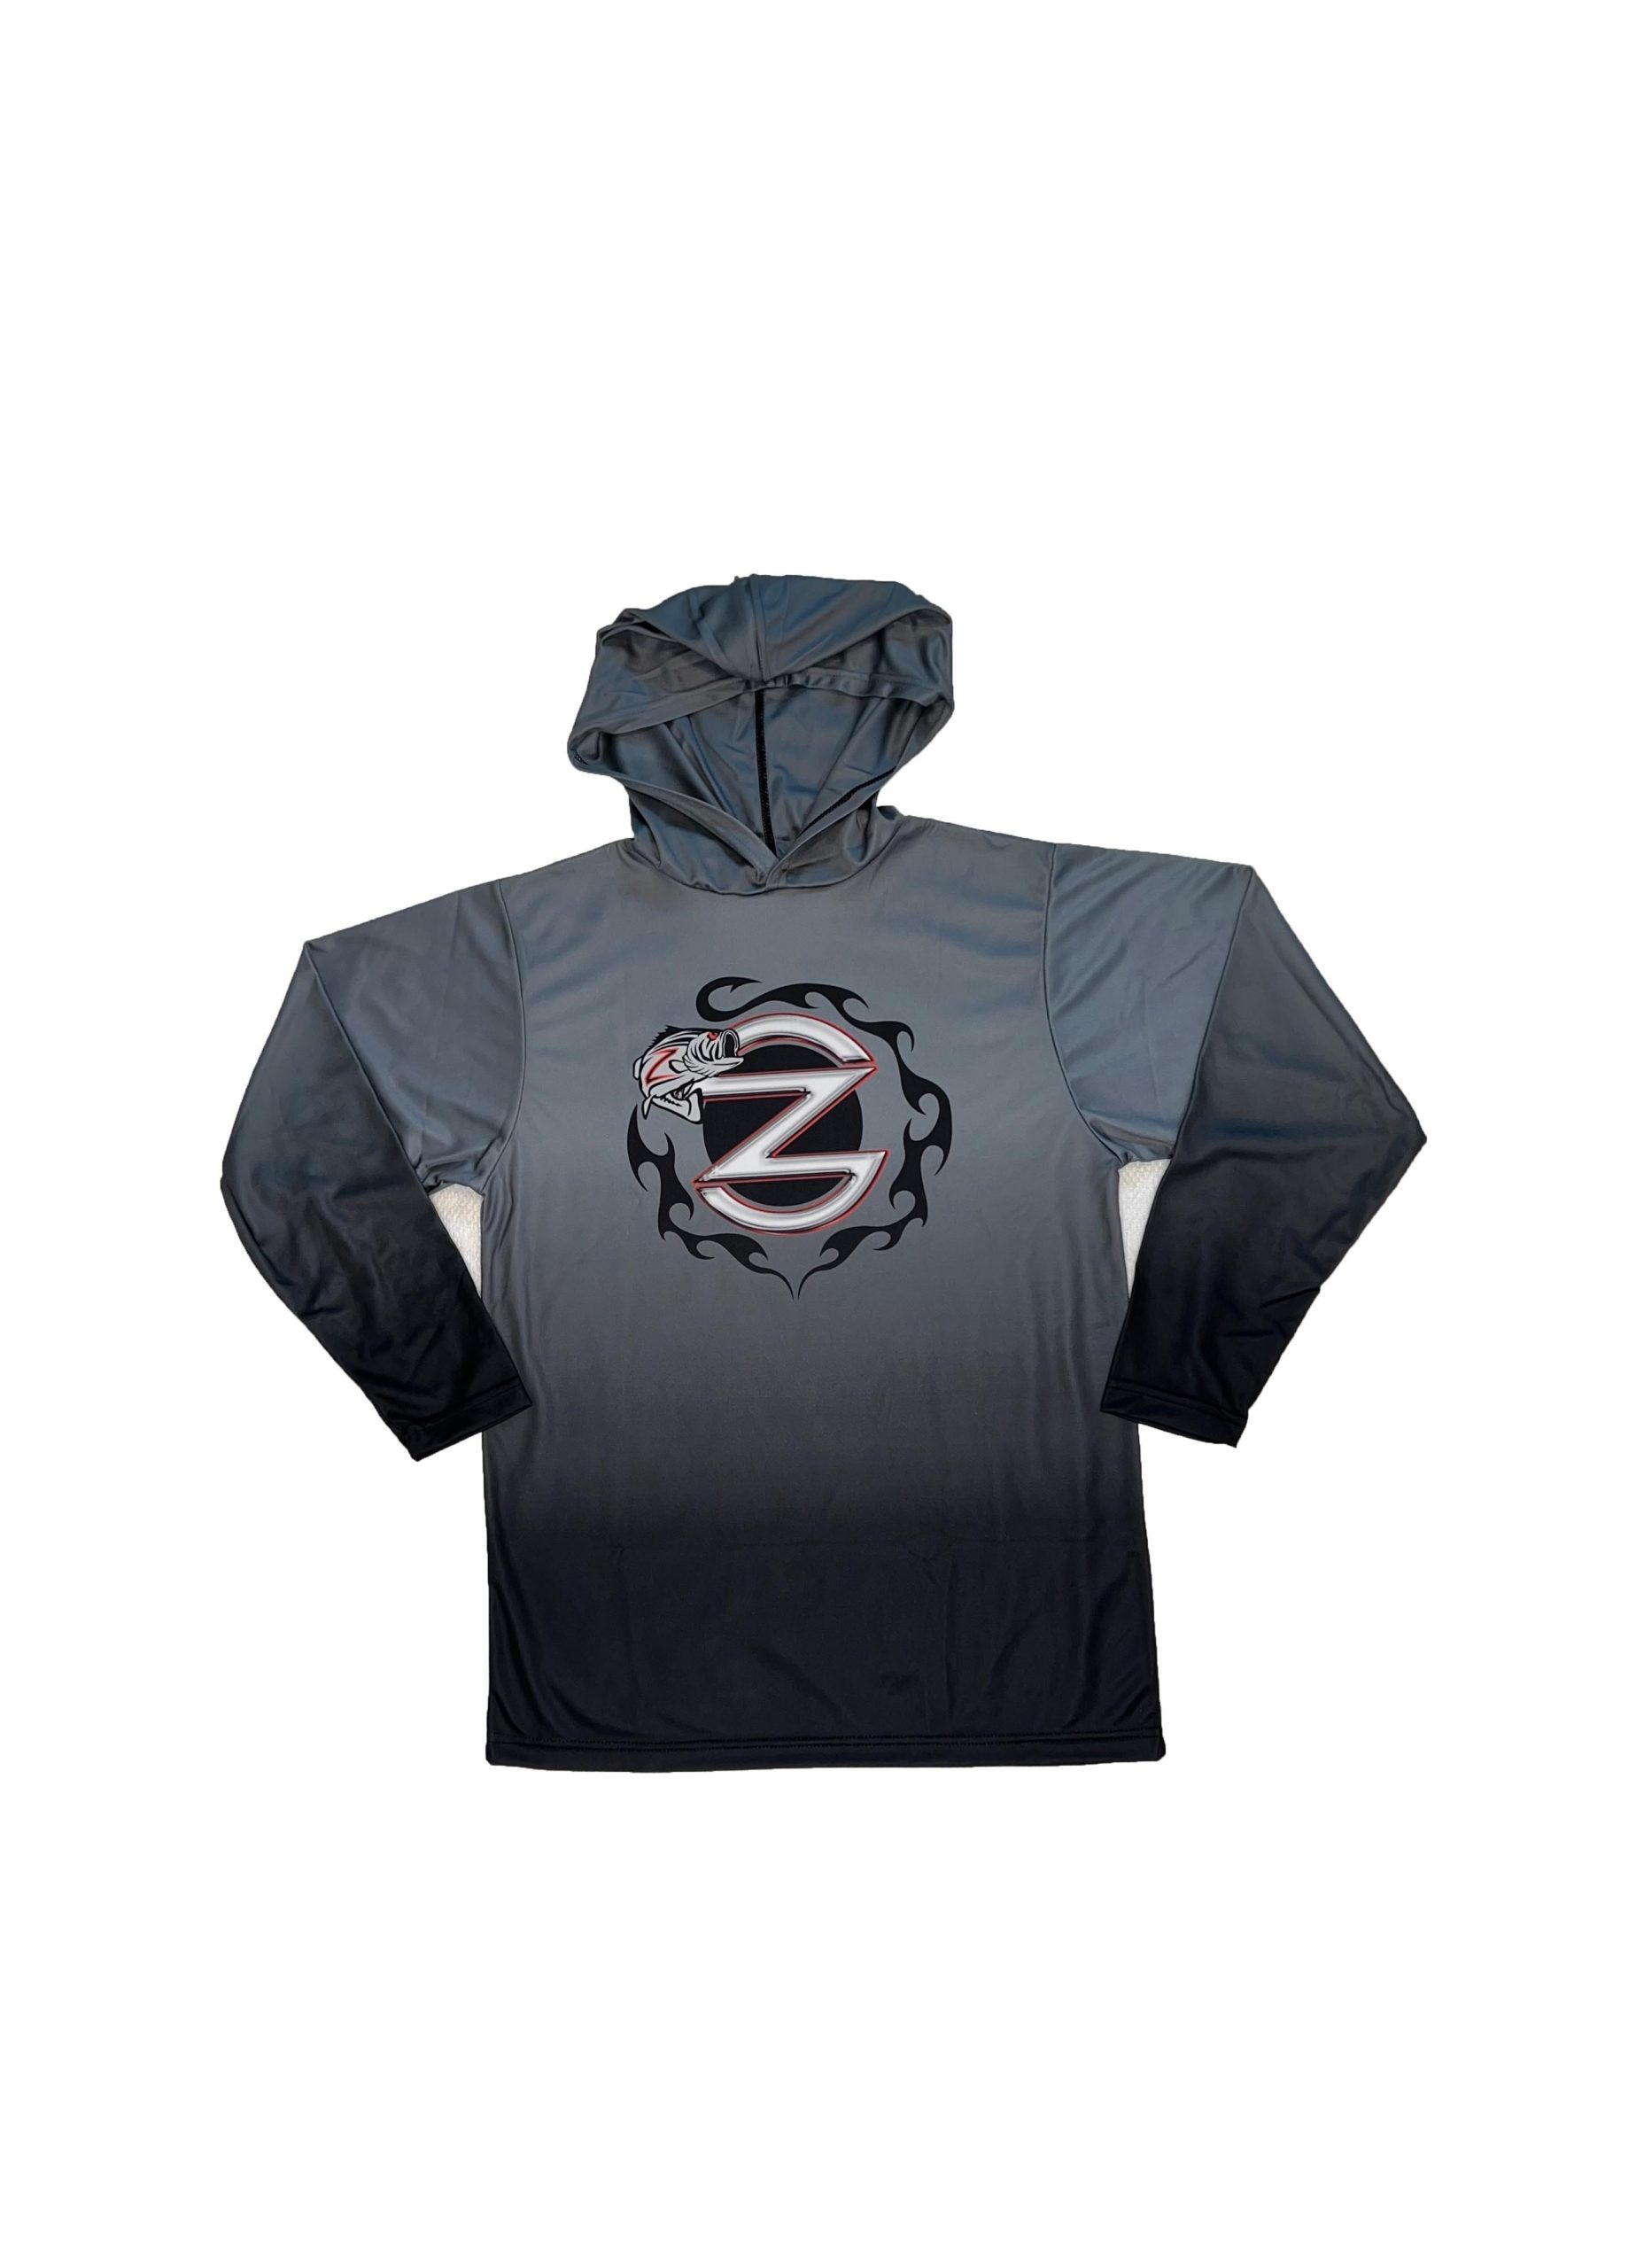 MEN'S LONG SLEEVE HOODED FISHING SHIRT WITH COLOR LOGO – Mark Zona – Zona's  Awesome Fishing Show